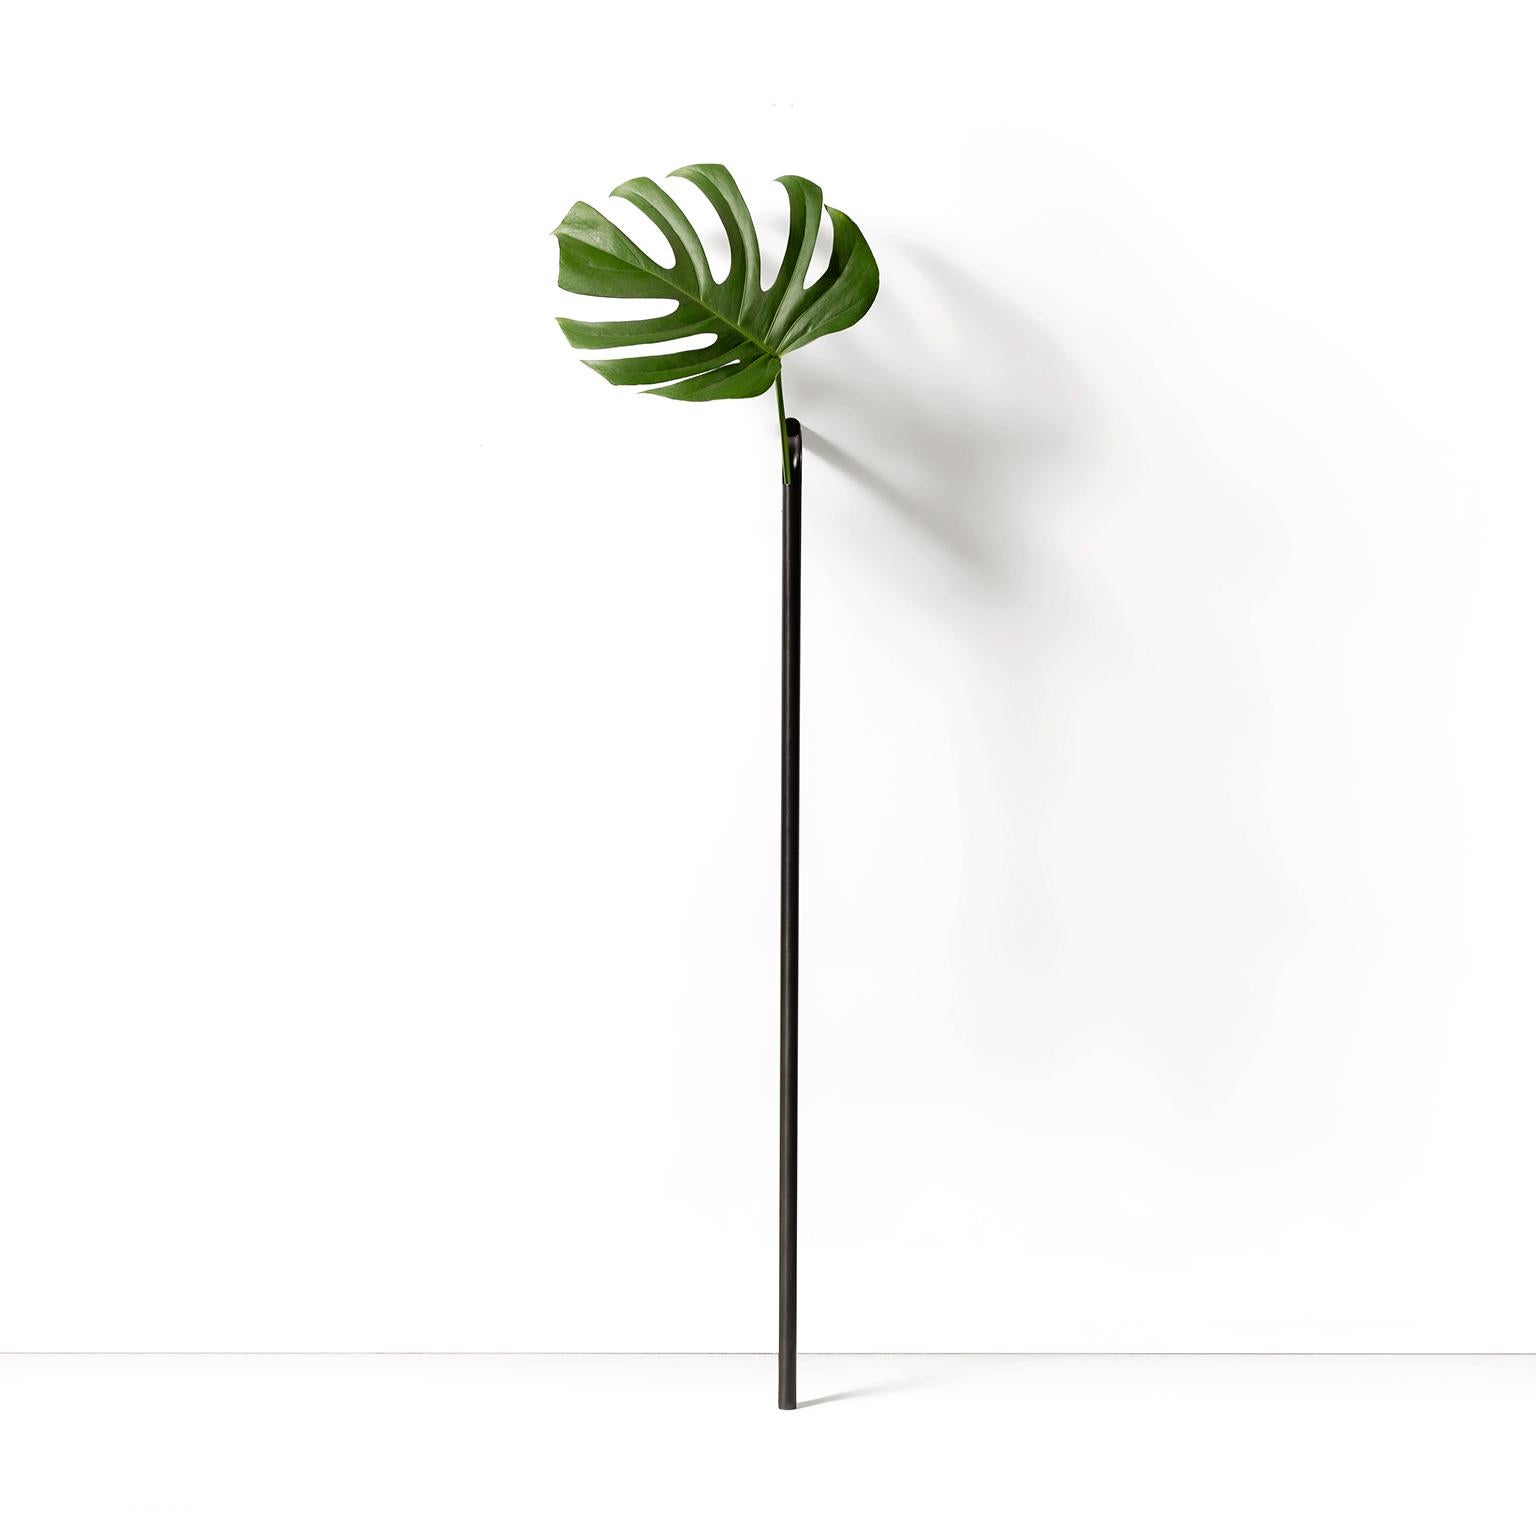 Solo vase proposes an unconventional and delicate way of bringing nature into the house. The slim metallic tube holds a single leaf or flower, mimetizing the continuation of the stems. The detail is made by a cut in the curve of the tube, inspired